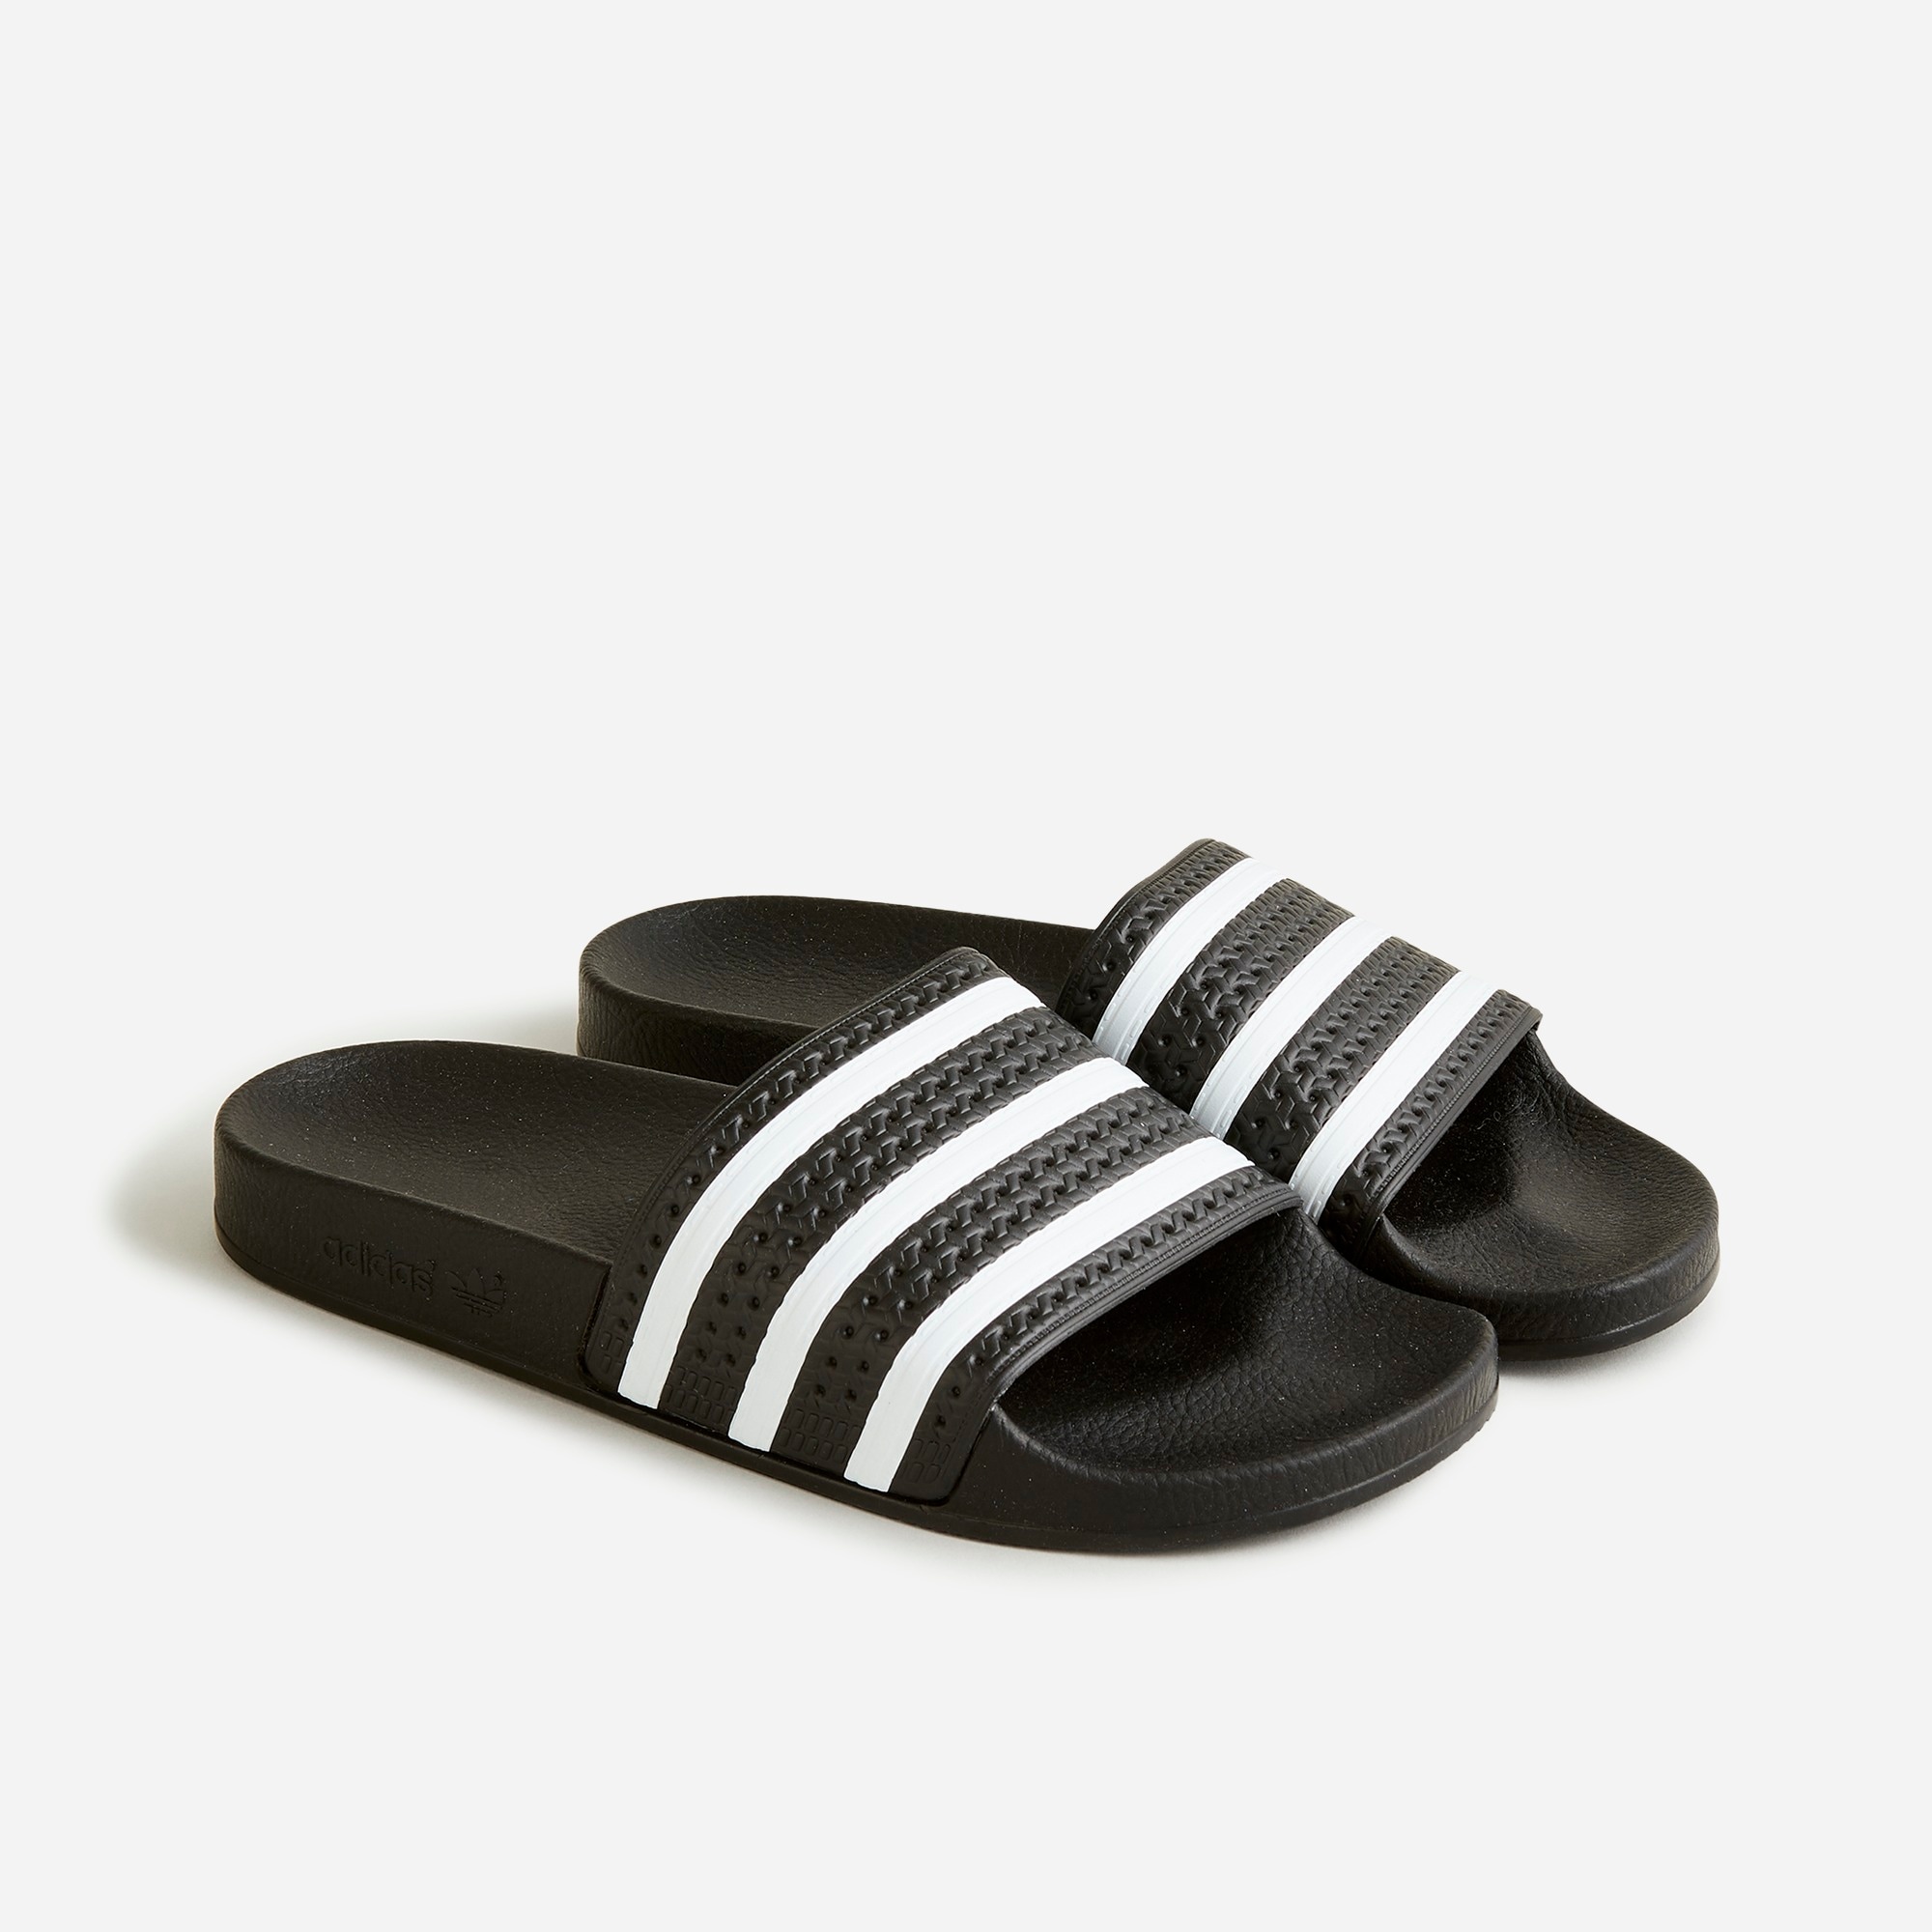 adidas slides afterpay